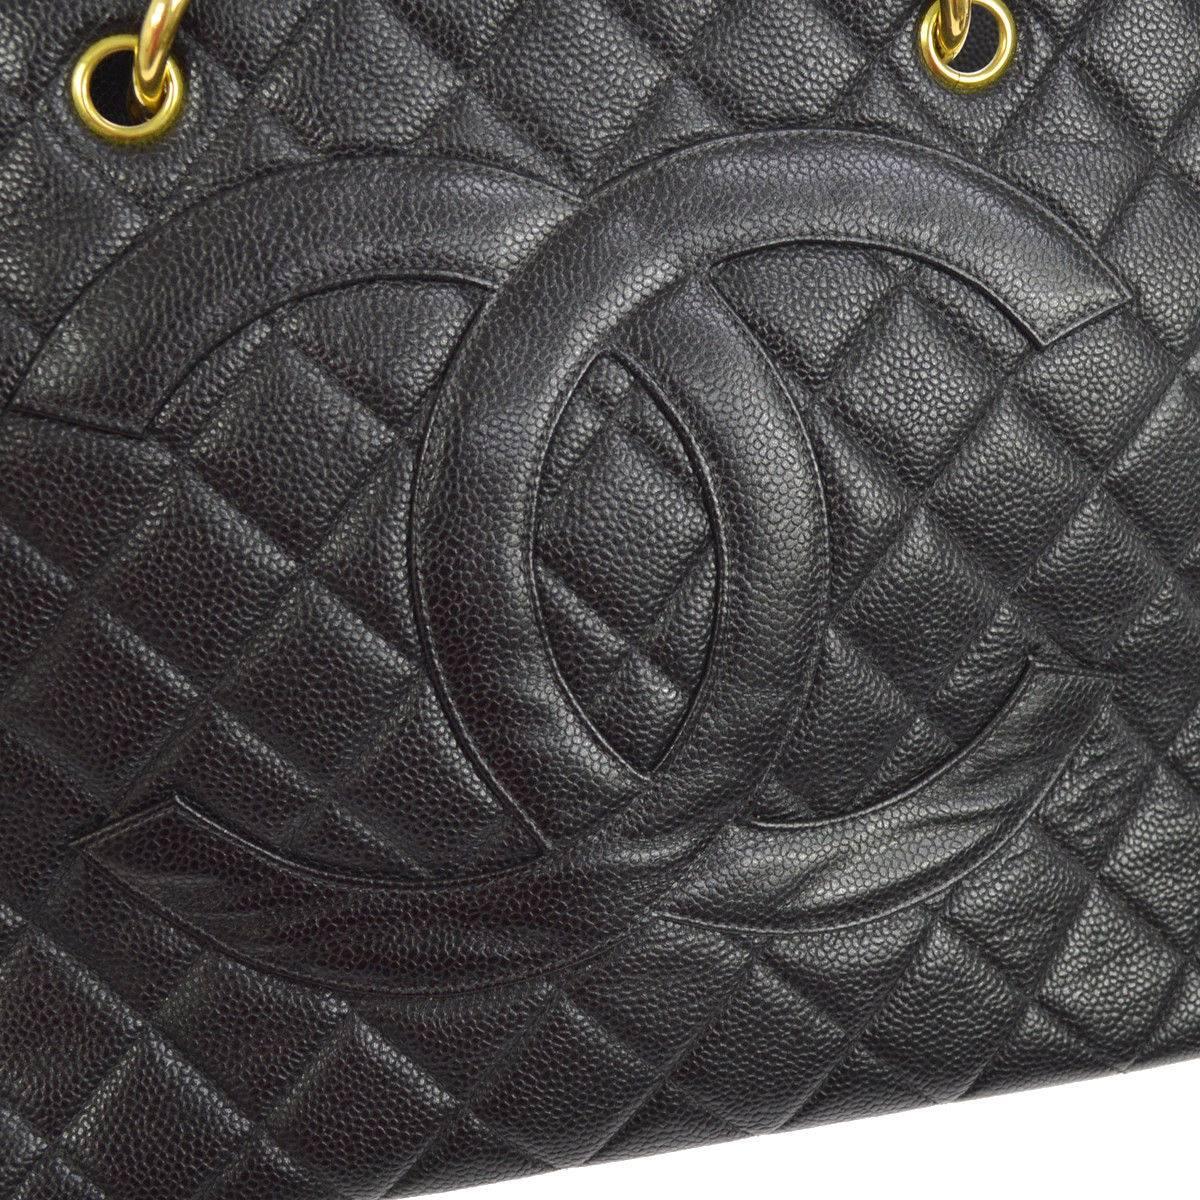 Chanel Black Caviar Leather Carryall Travel Top Handle Shoulder Tote Bag

Leather
Gold tone hardware
Leather lining
Date code present
Made in France
Handle drop 6"
Measures 12.75" W x 9.5" H x 6.75" D 